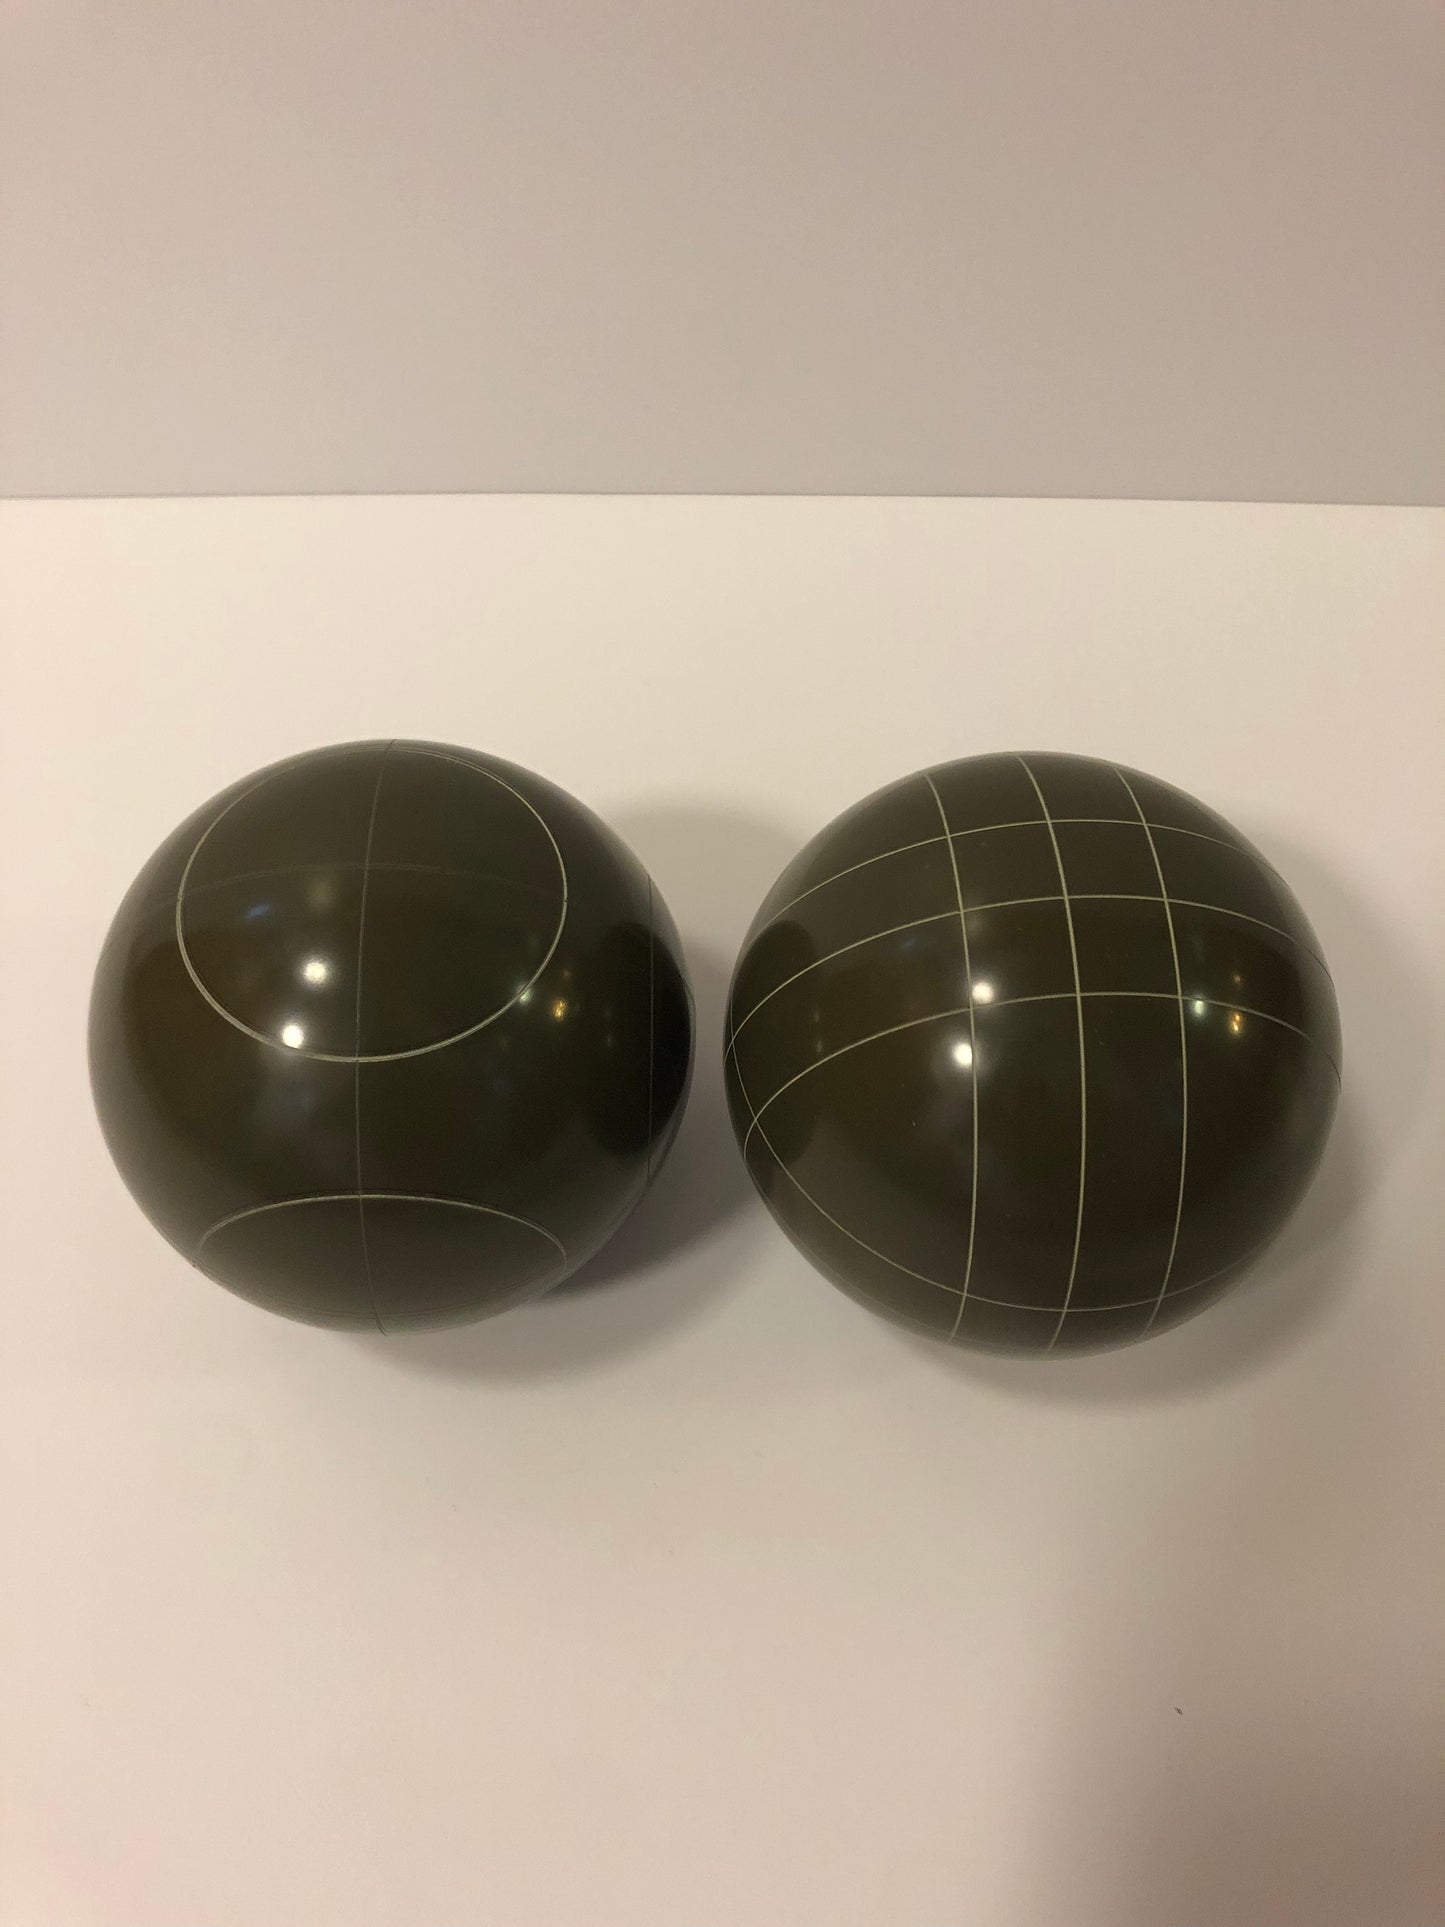 Pack of 2 - Replacement Bocce Balls - 107mm - Olive Brown with 2 different scoring patterns